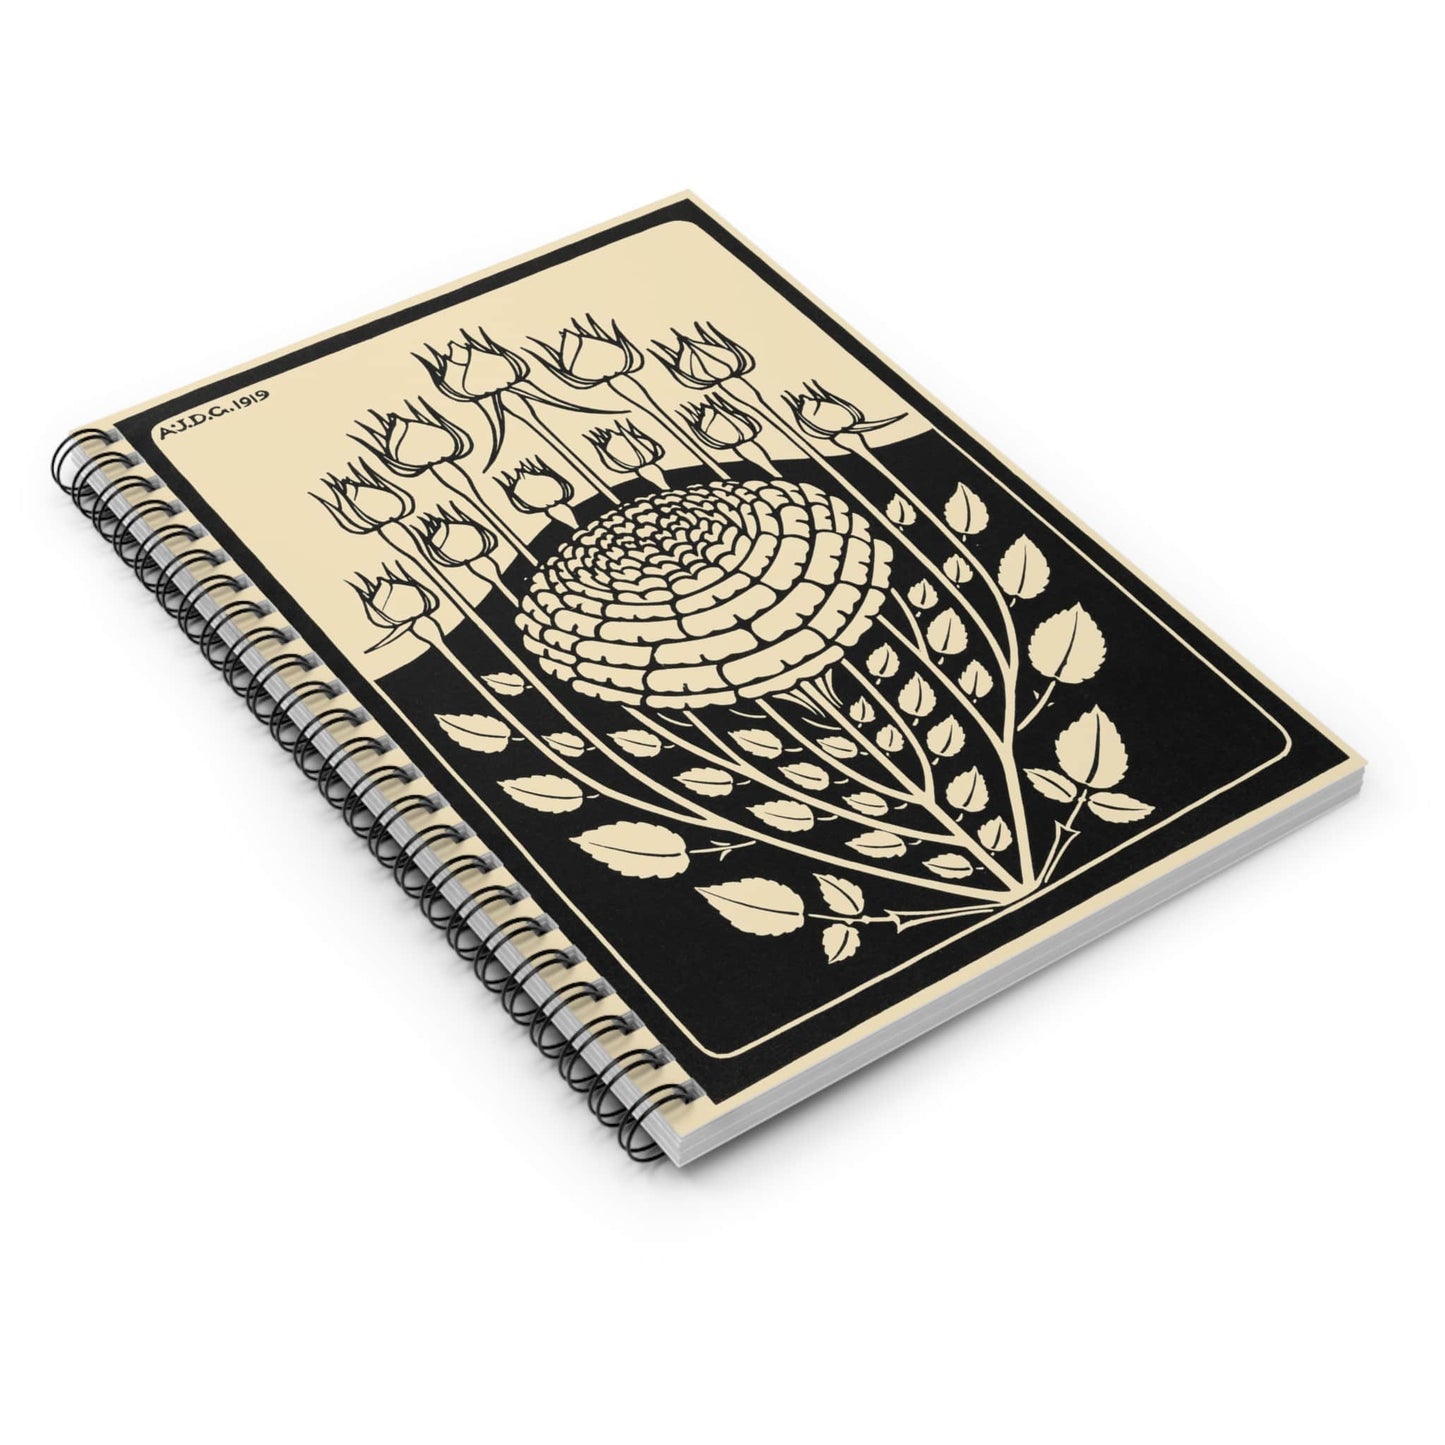 Ink Flower Aesthetic Spiral Notebook Laying Flat on White Surface